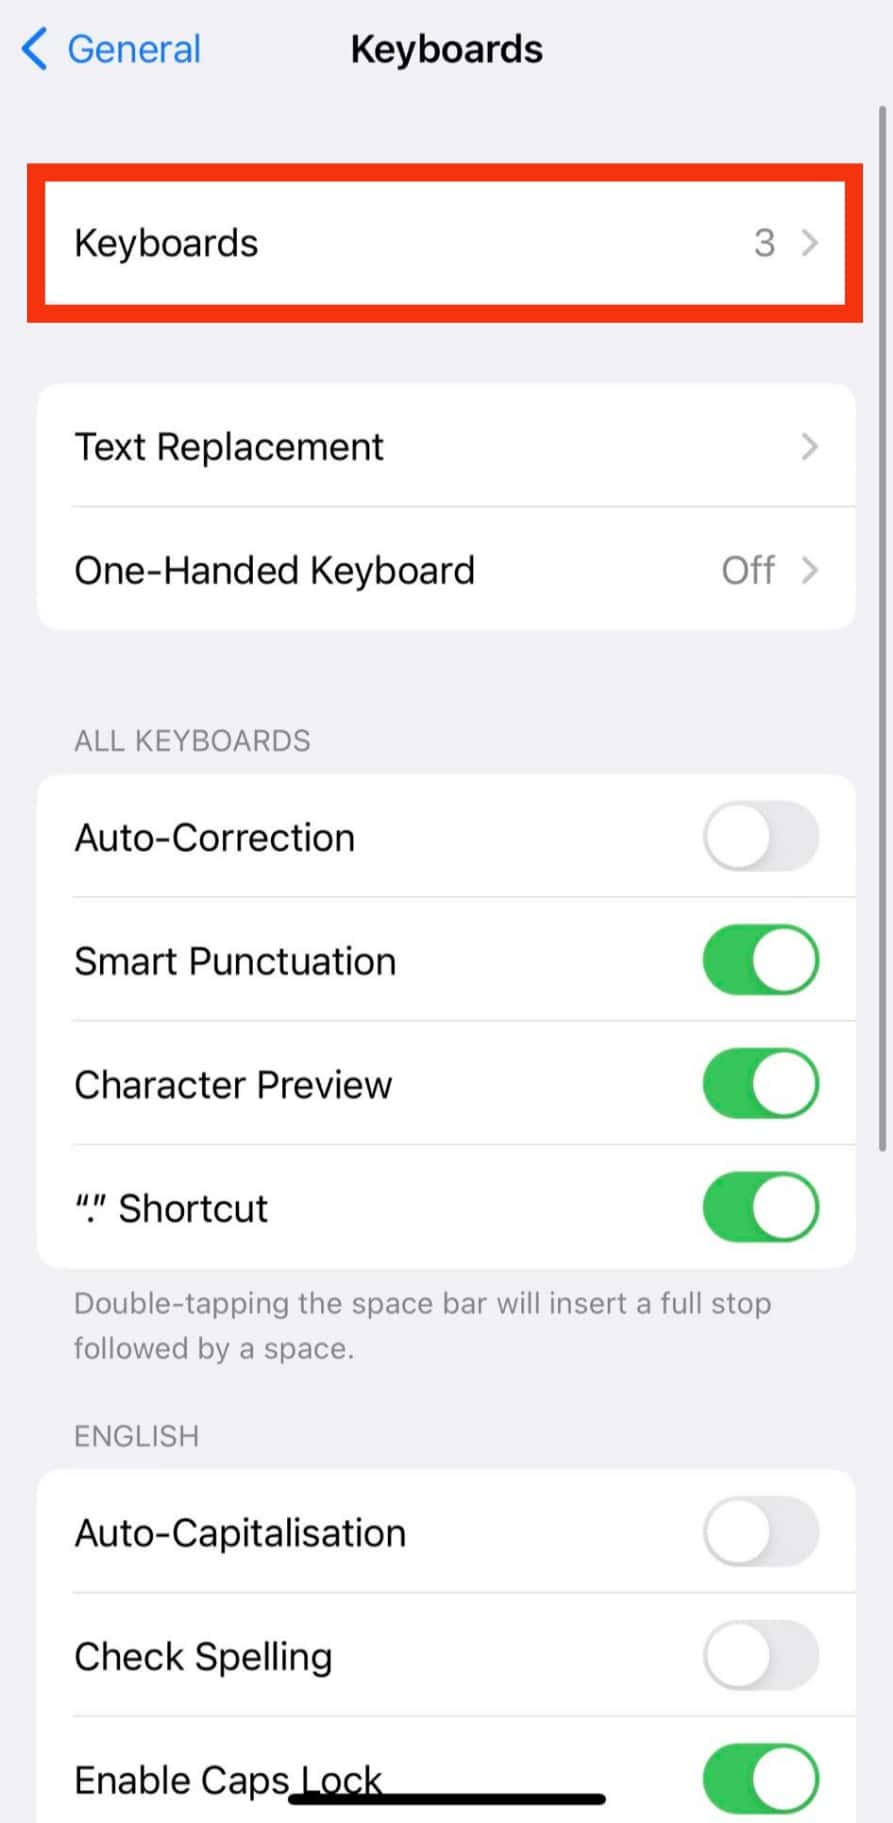 Tap The Option For Keyboards.